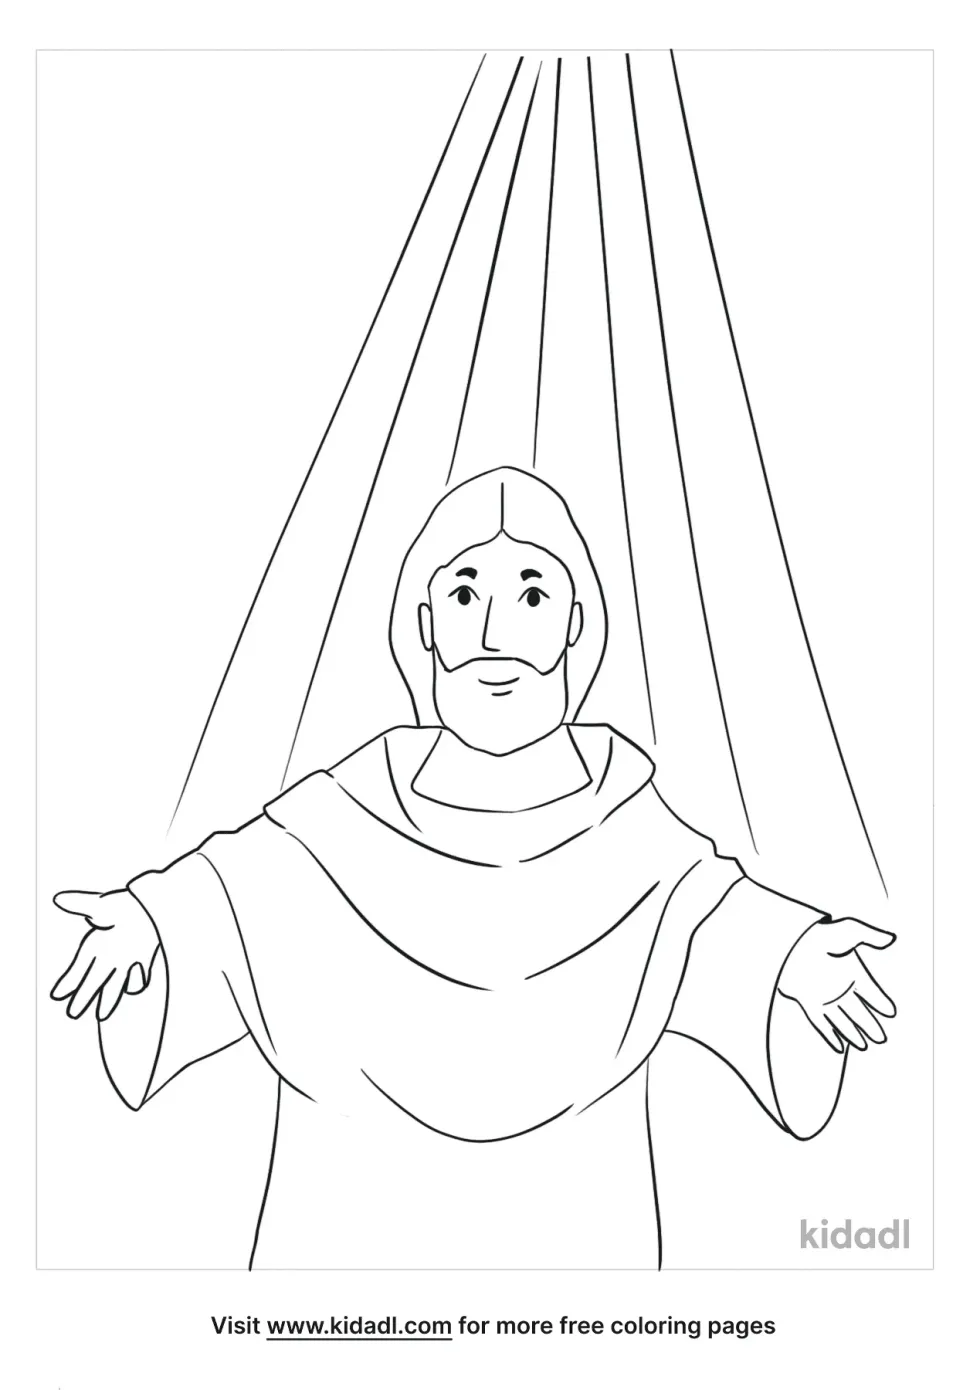 Our Father Coloring Page